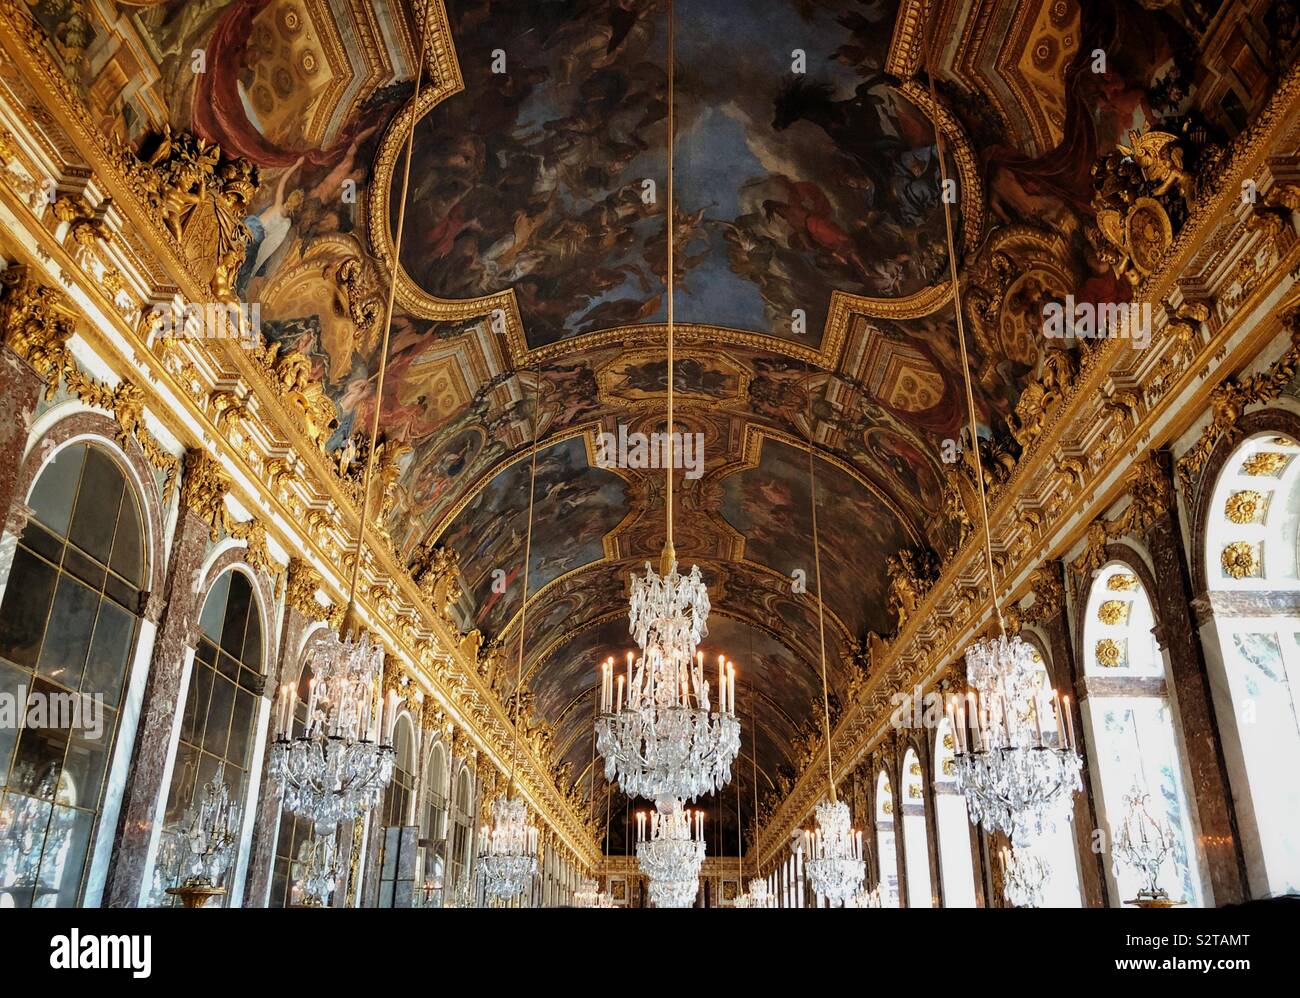 Enormous vaulted painted ceilings and crystal chandeliers of the Hall of Mirrors in Versailles Palace Stock Photo